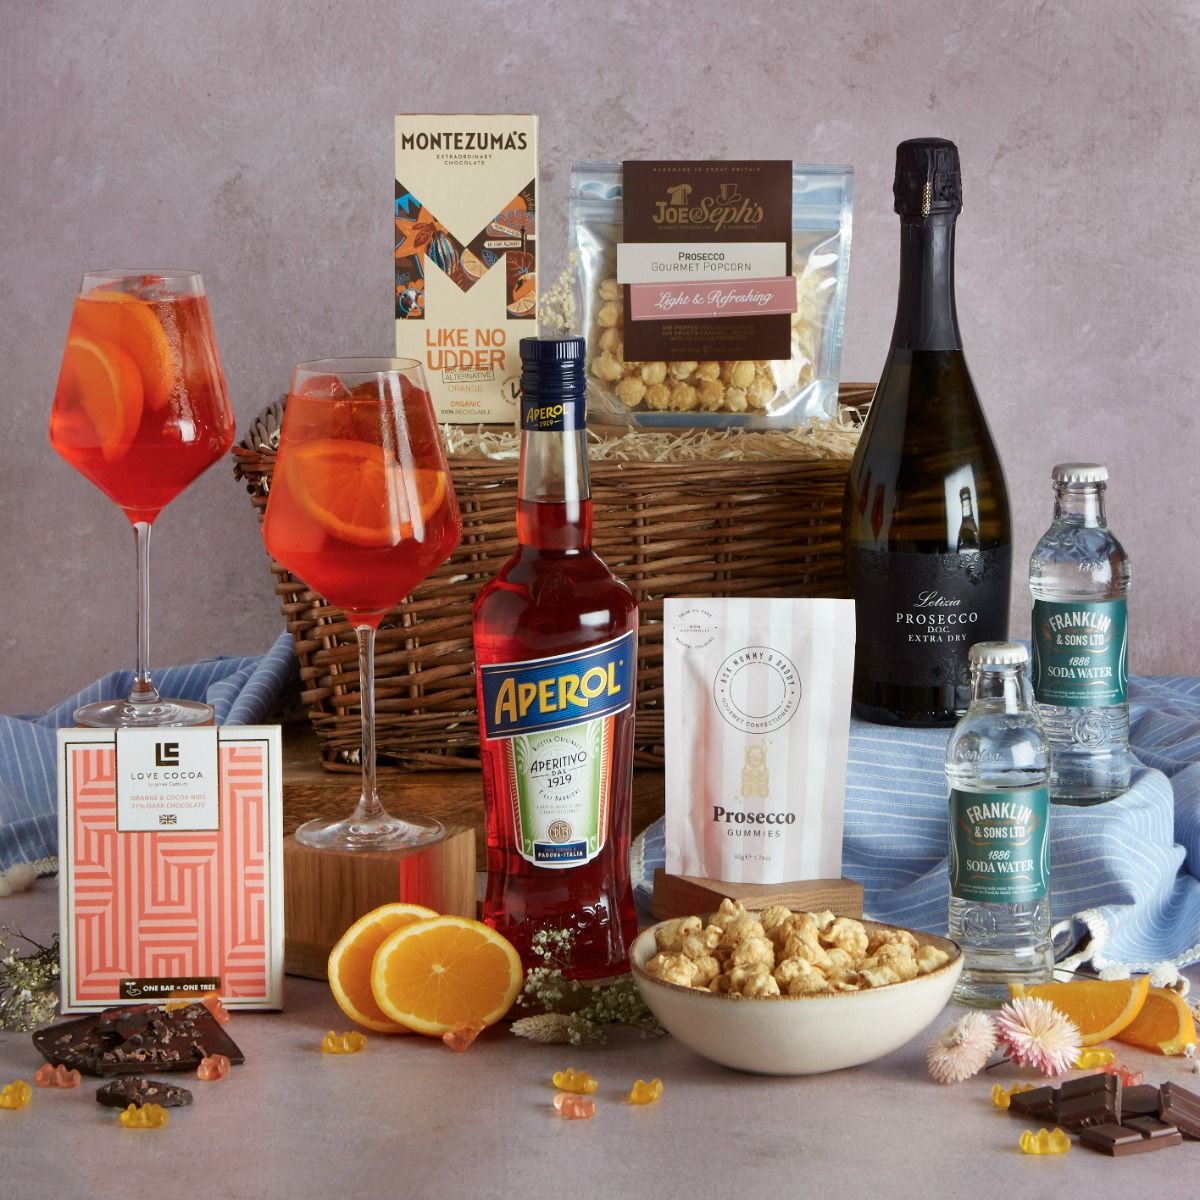 Aperol Spritz Summer Hamper with contents on display and two cocktail glasses of Aperol